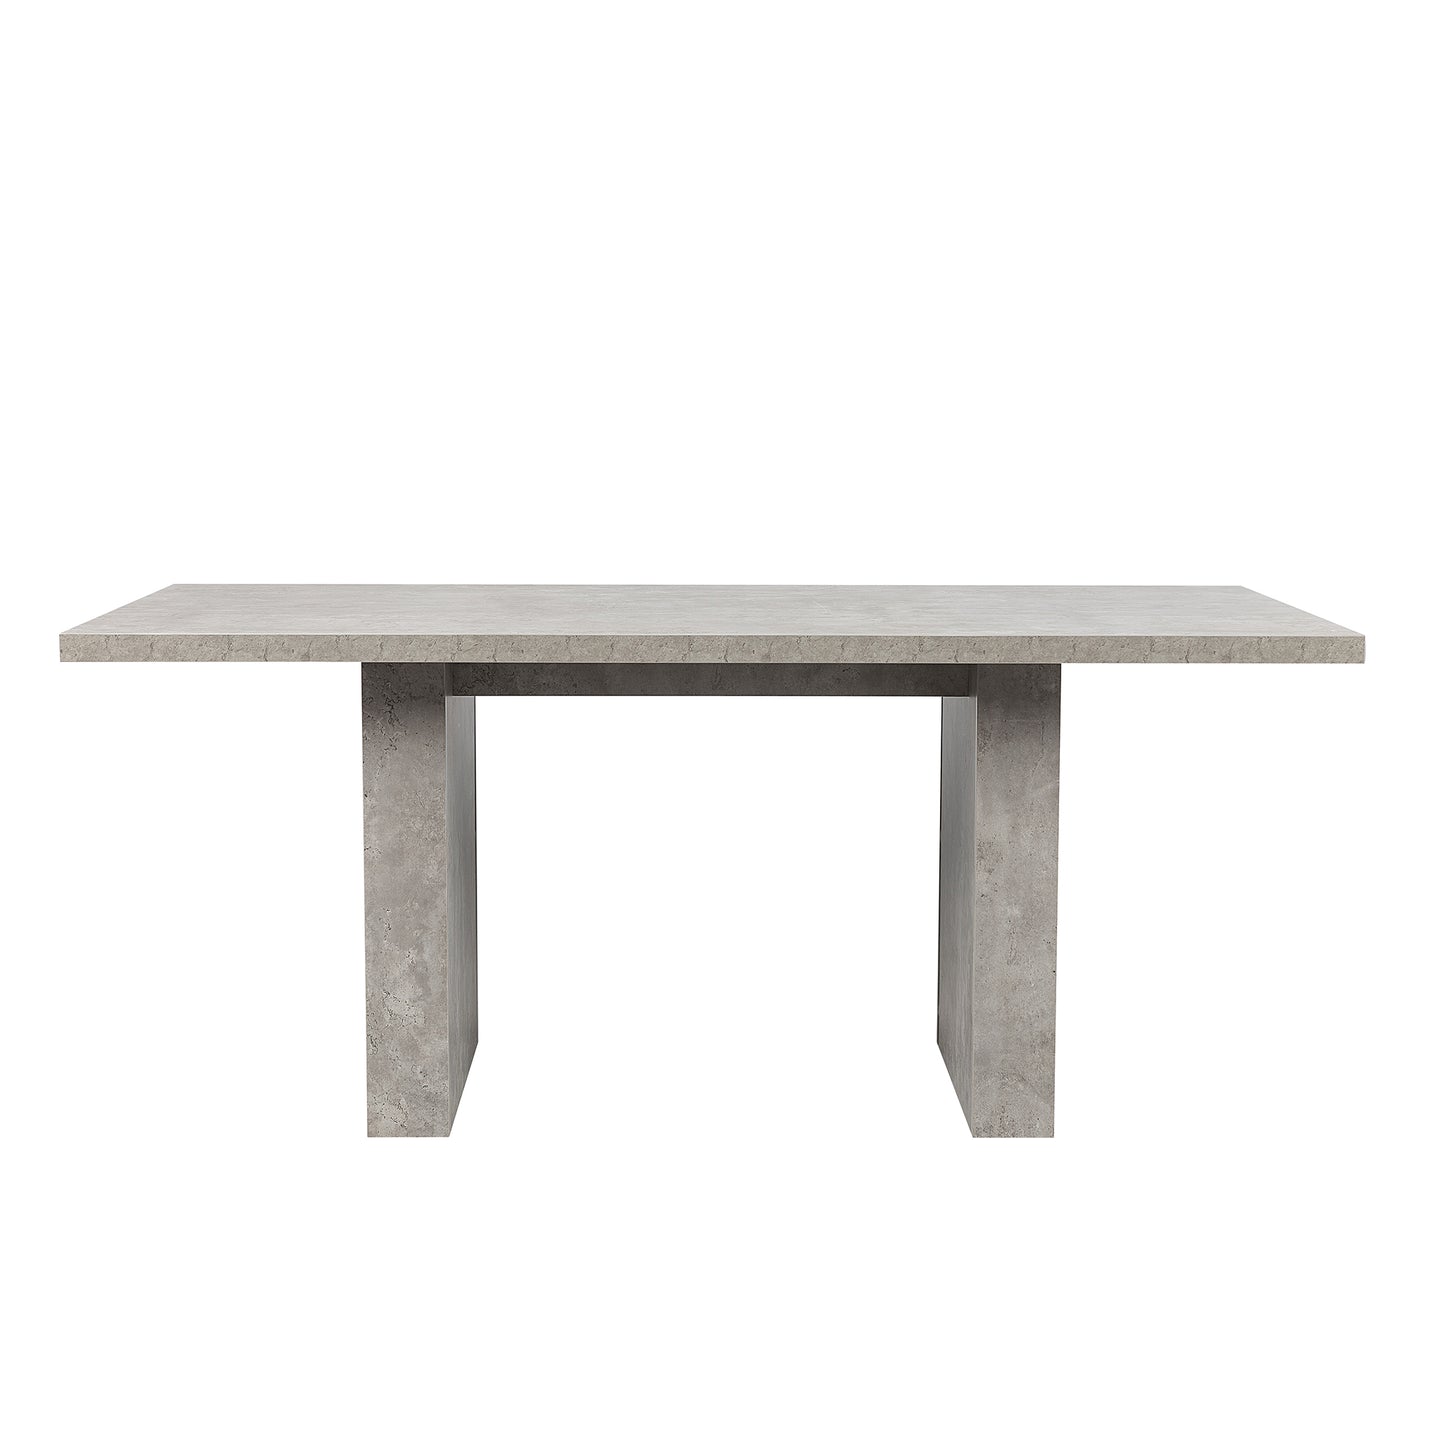 GIA 70 Inch Rectangular Farmhouse Wood Dining Table, Cemented